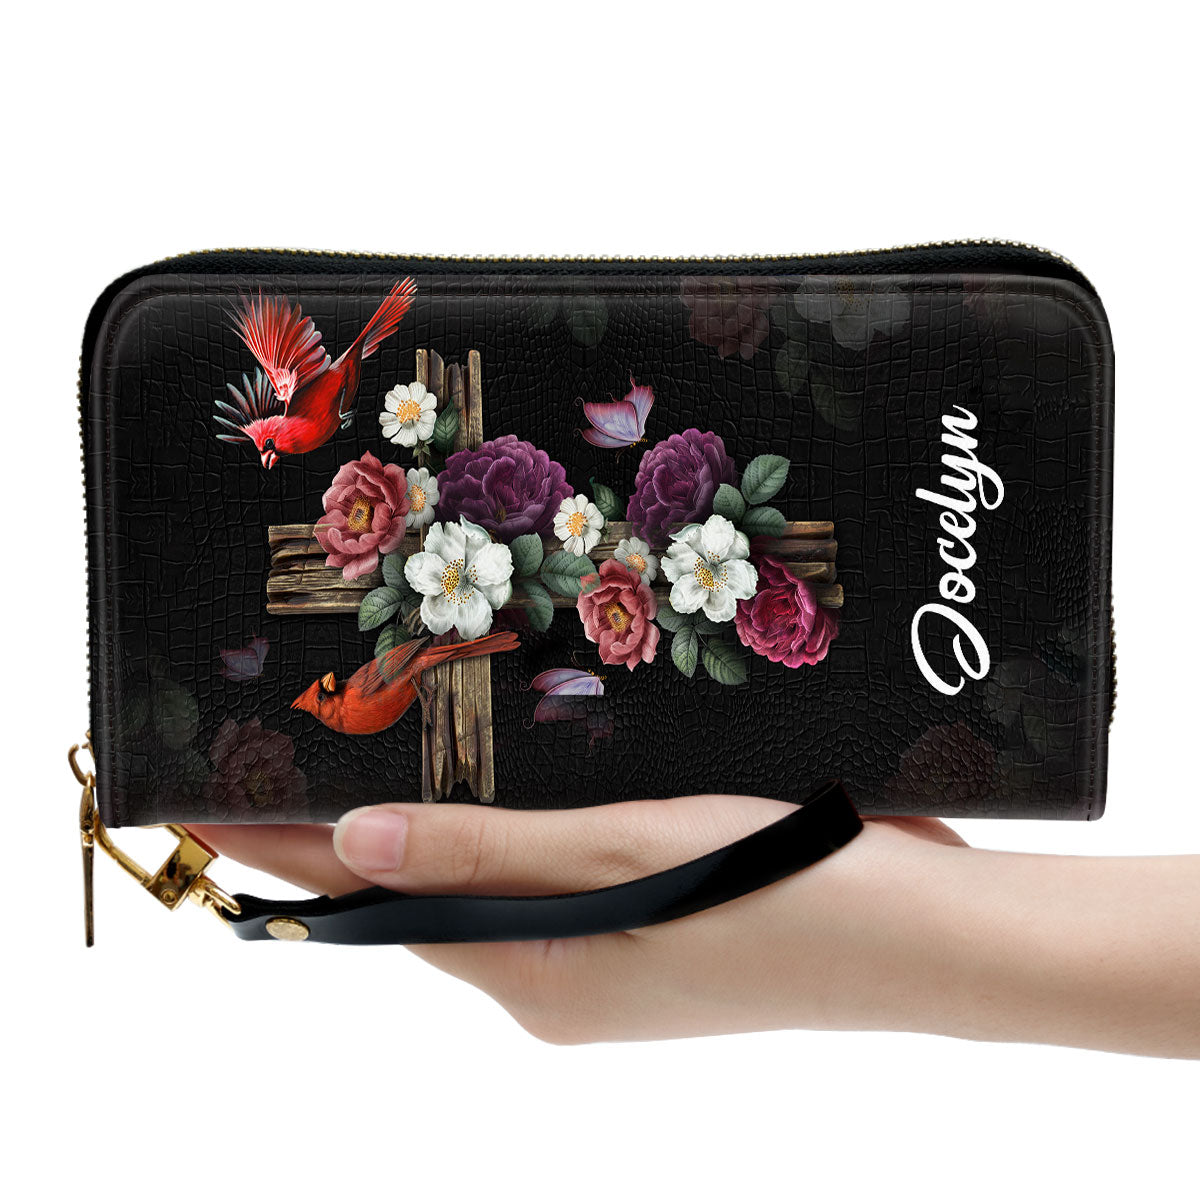 Women Clutch Purse - I Still Believe In Amazing Grace Flower And Cross - Personalized Leather Clutch Purse - Gifts For Christian Women